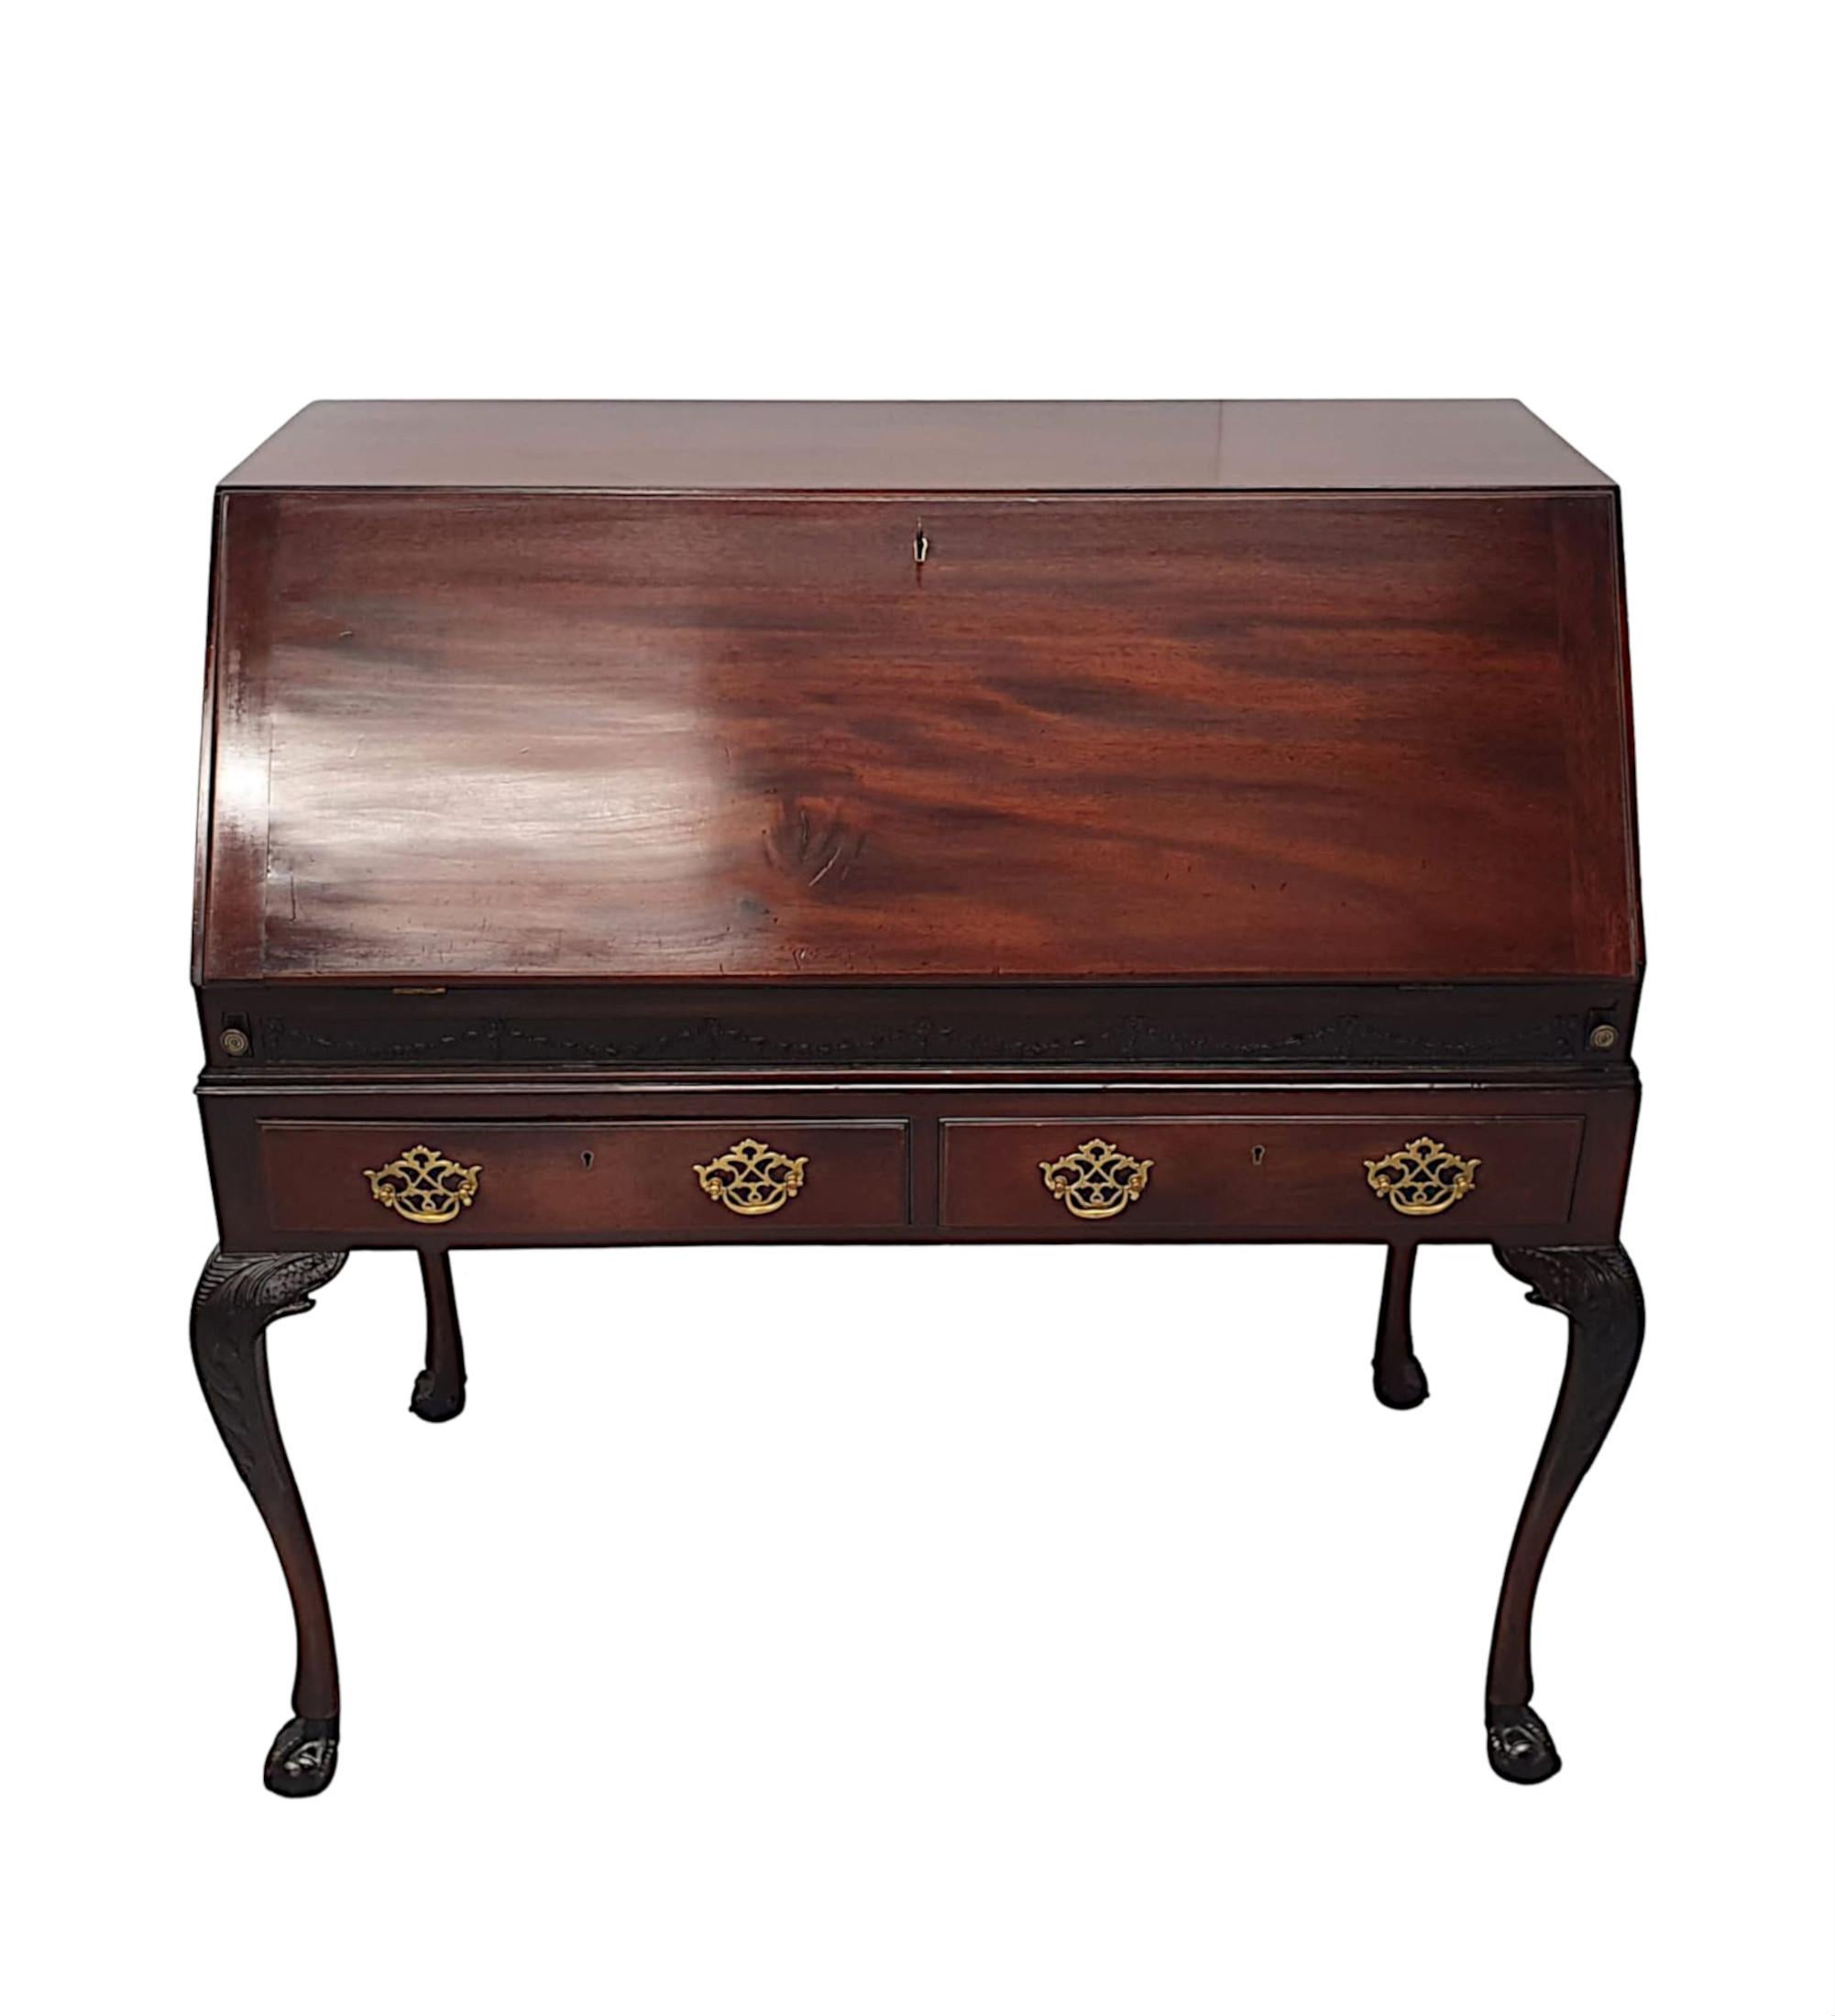 An Exceptional 19th Century Irish Fall Front Bureau by Butlers of Dublin For Sale 8